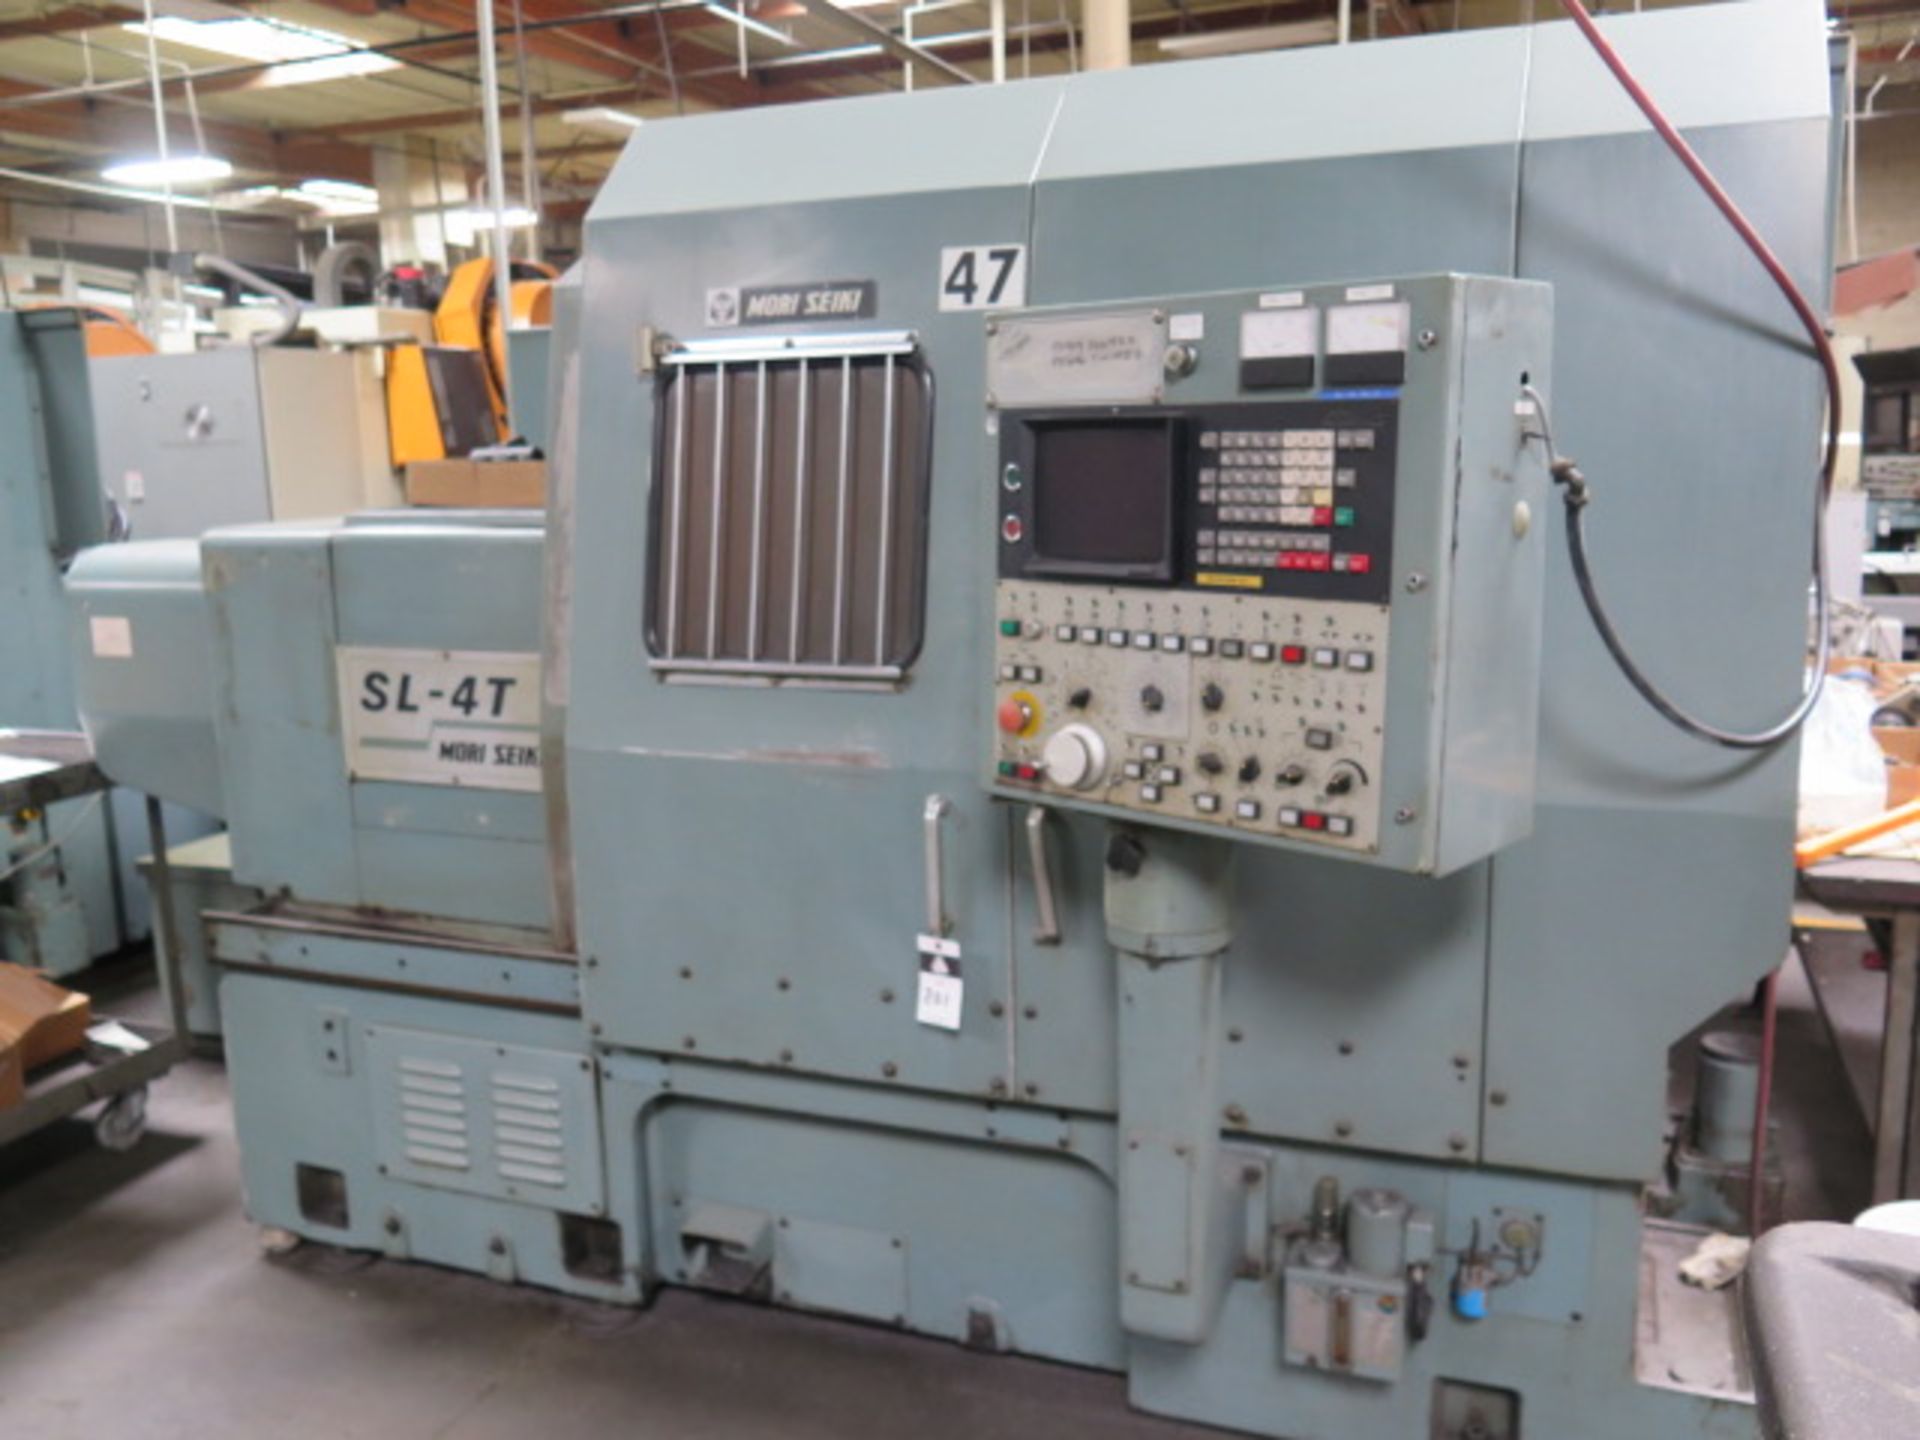 Mori Seiki SL-4T CNC Turning Center s/n 9 w/ Fanuc 6T Controls, 12-Station Turret, SOLD AS IS - Image 2 of 13